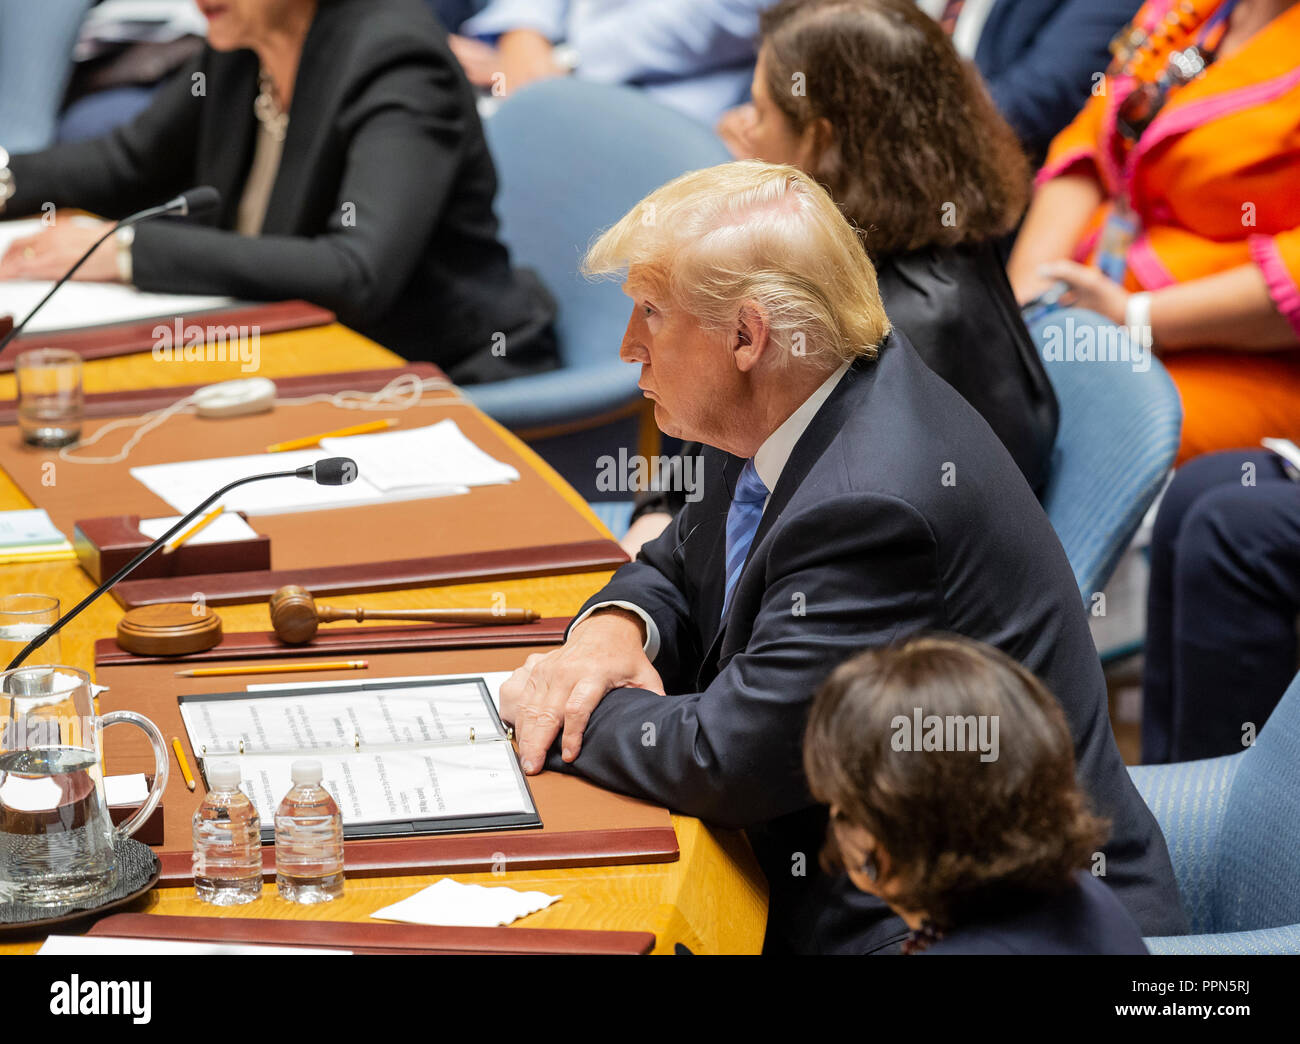 New York, USA - September 26, 2018: US President Donald Trump presided Security Council meeting on Non-proliferation of Weapons of Mass Destruction at United Nations Headquarters Credit: lev radin/Alamy Live News Stock Photo